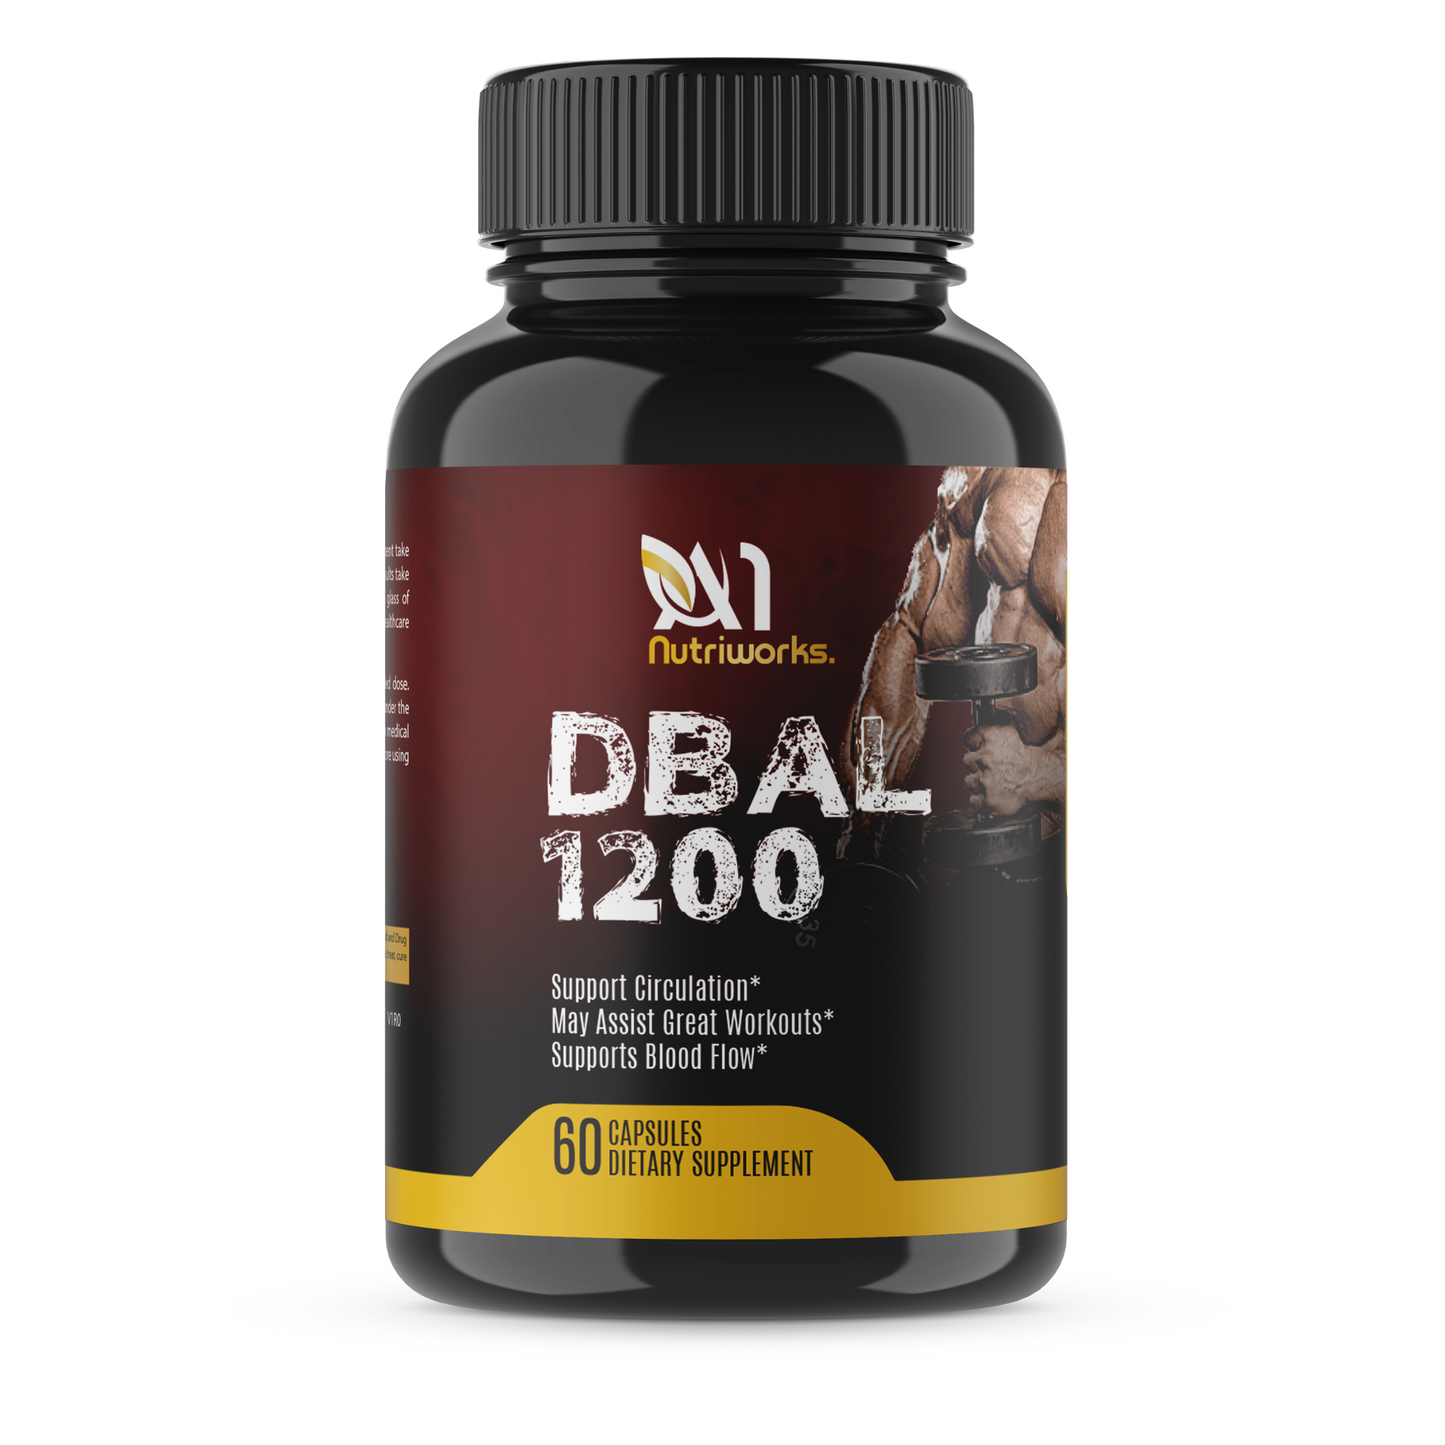 DBal 1200 Muscle Builder - Muscle & Testosterone  Performance Supplement for Muscle Growth and Strength